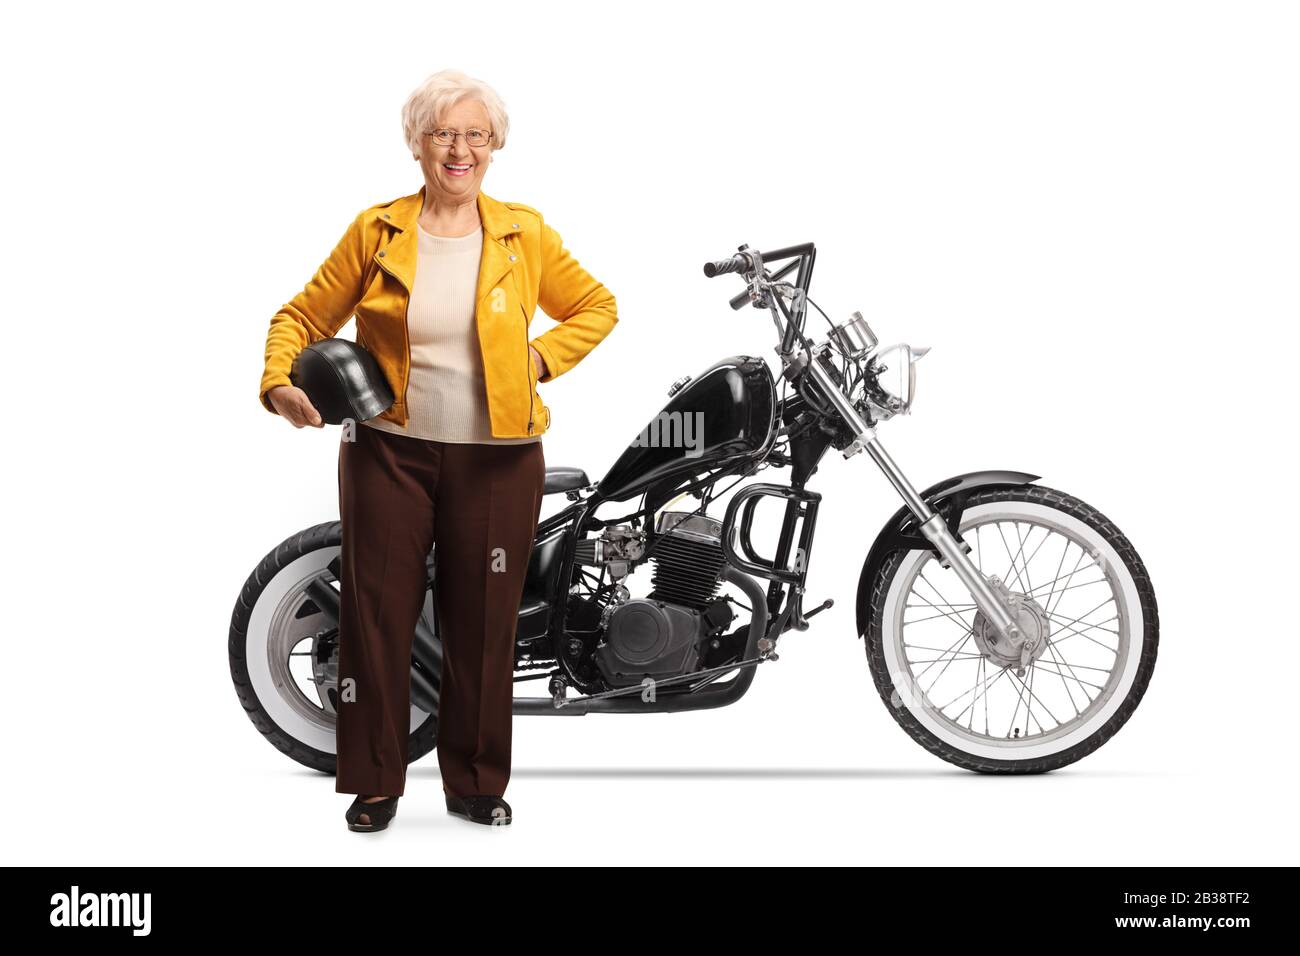 Full length portrait of a mature woman holding a helmet and standing next to a custom chopper motorcycle isolated on white background Stock Photo